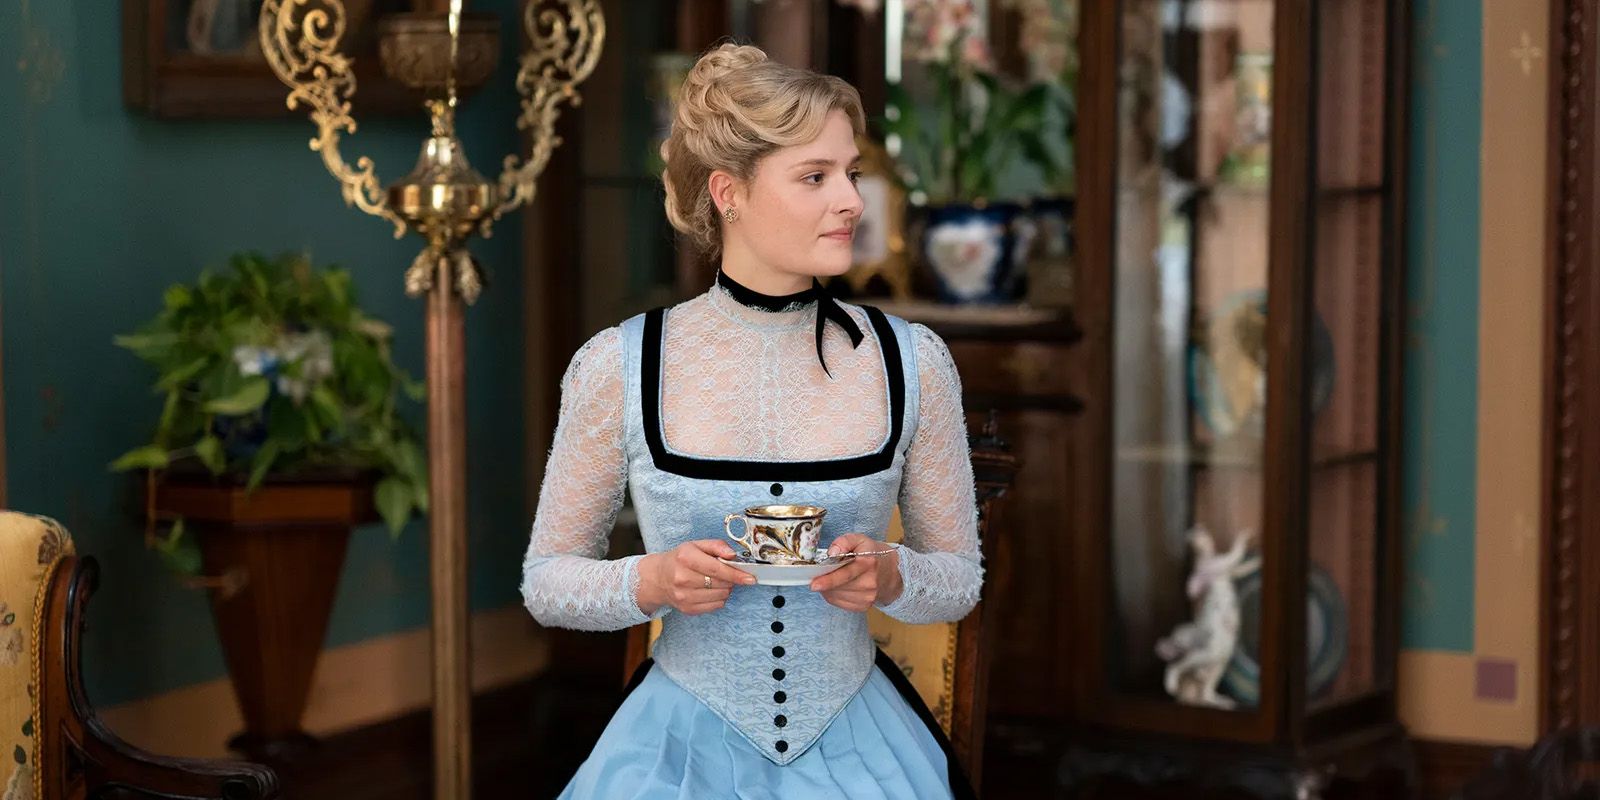 Louisa Jacobson as Marian in the Gilded Age. She's holding a cup of tea and wearing a blue and black dress with white lace on the top